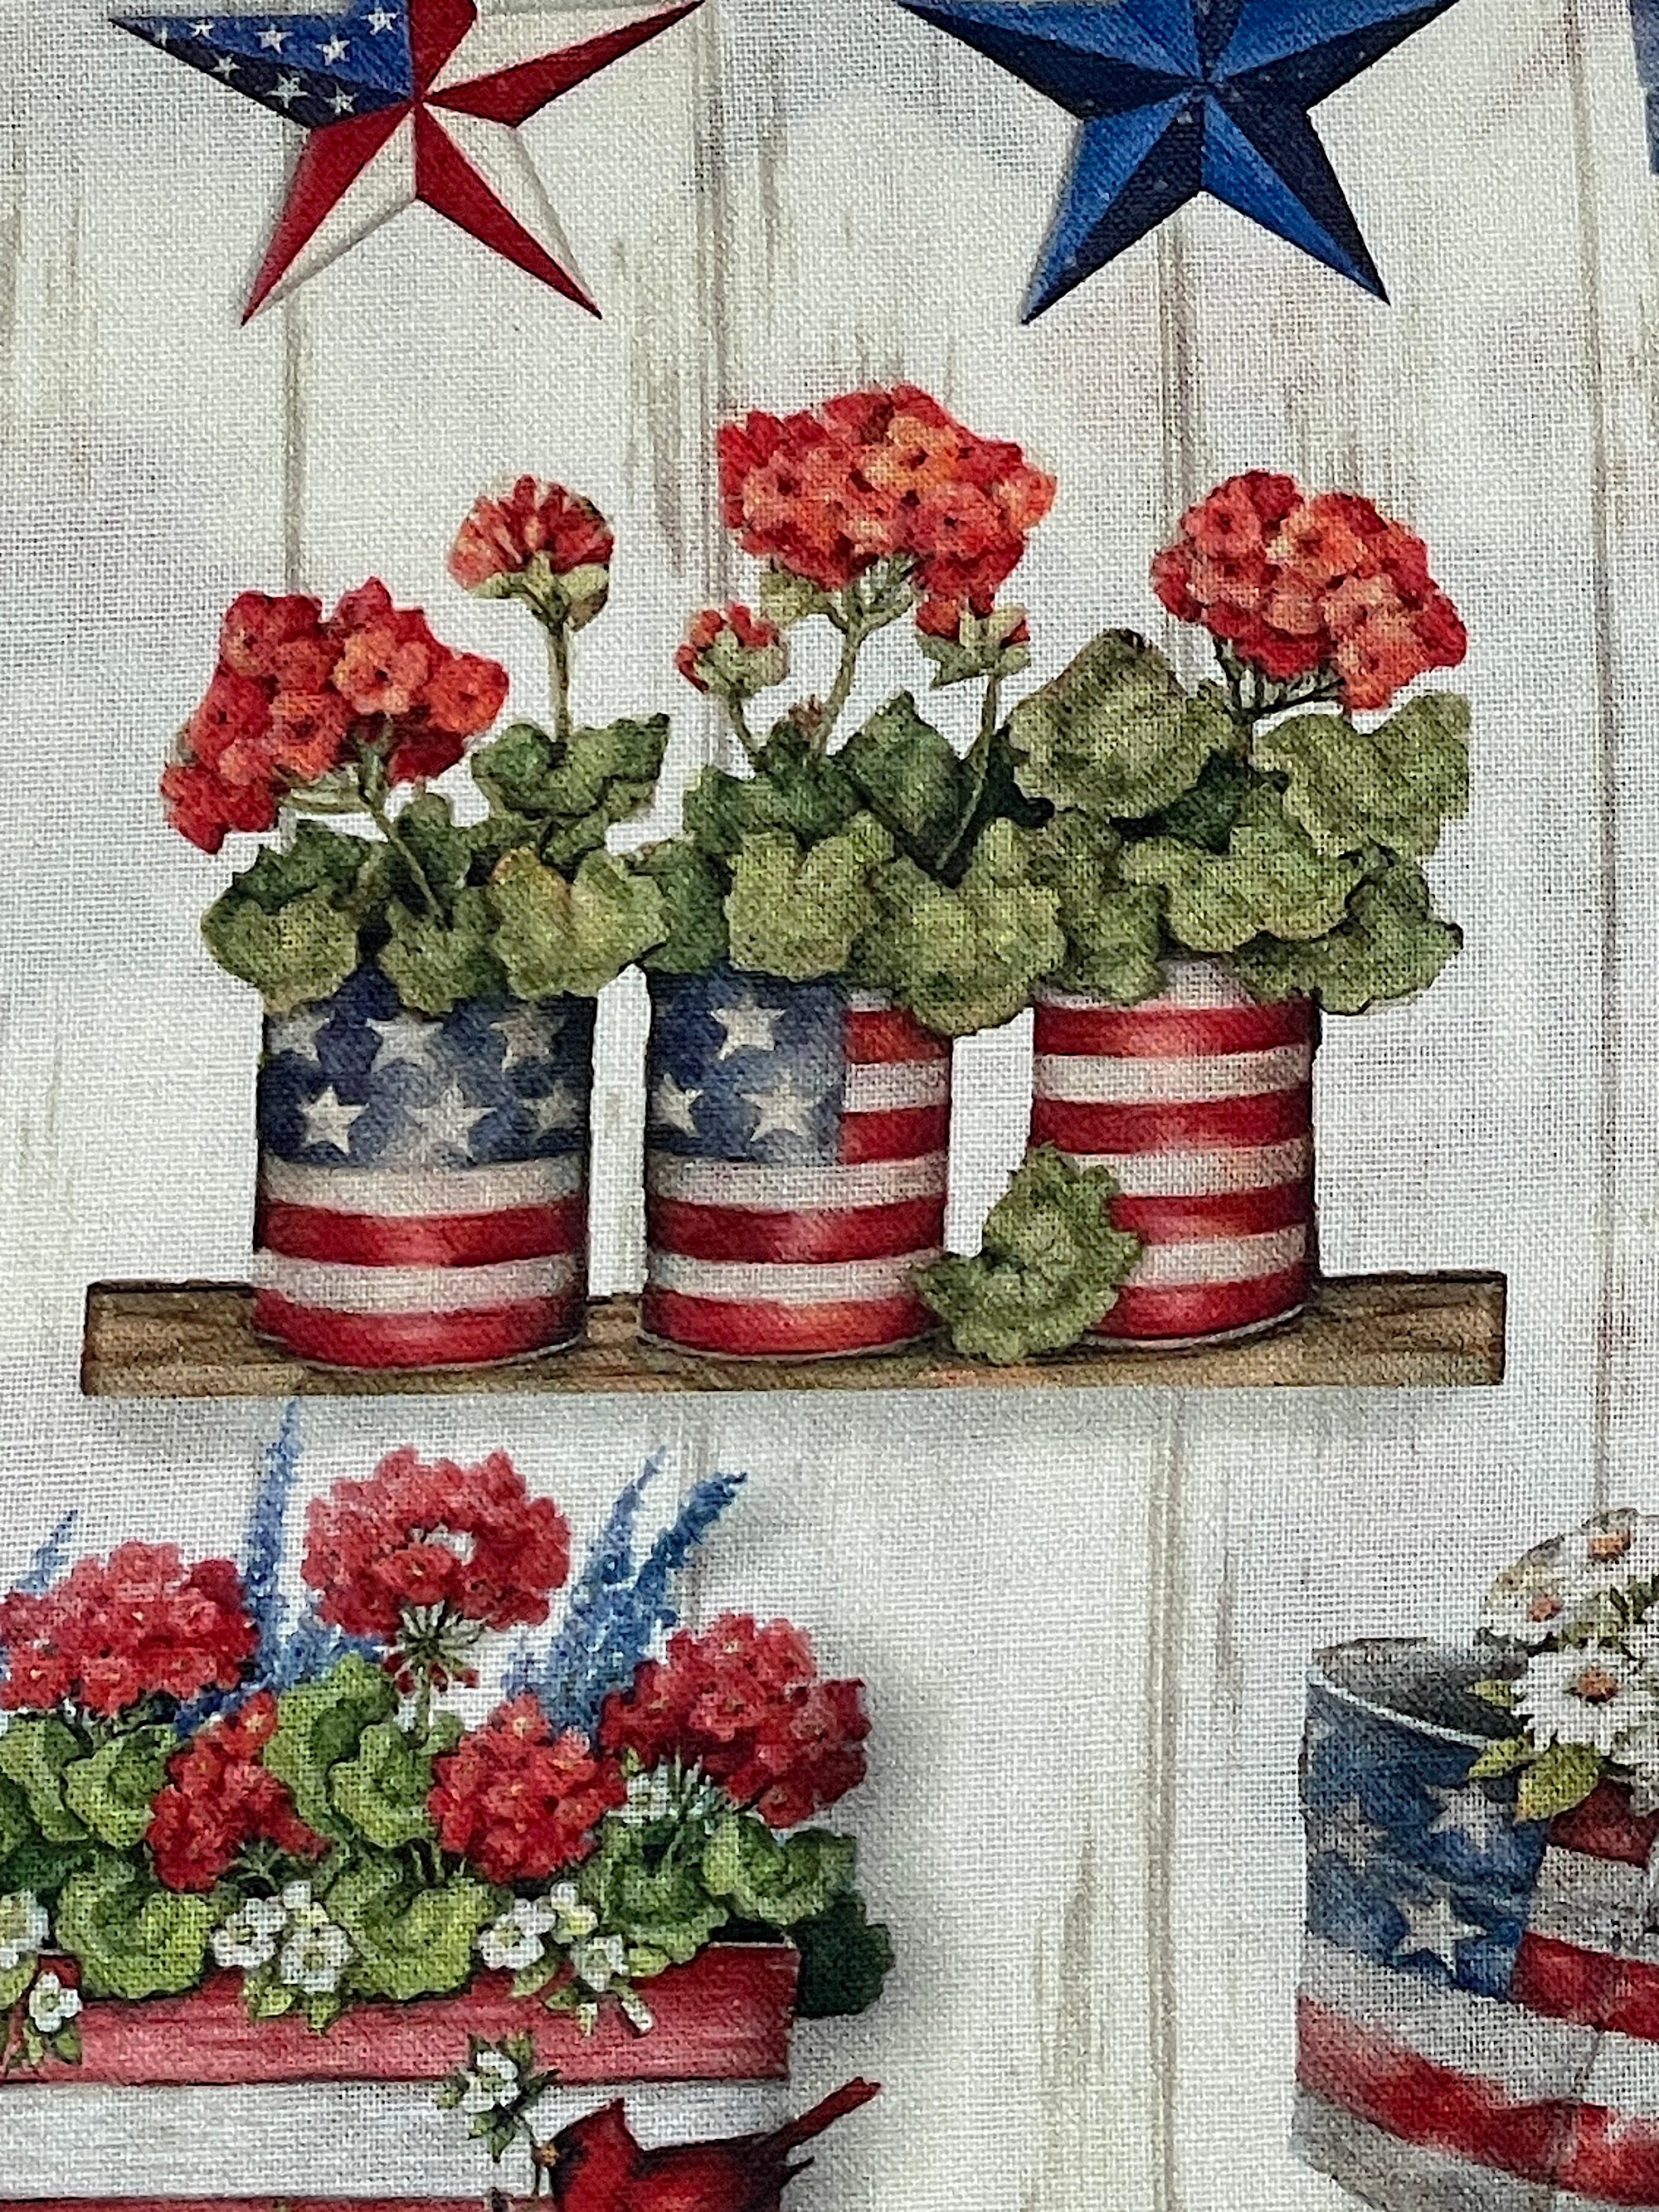 Close up of 4 cans of geraniums, the cans have USA flags on them.